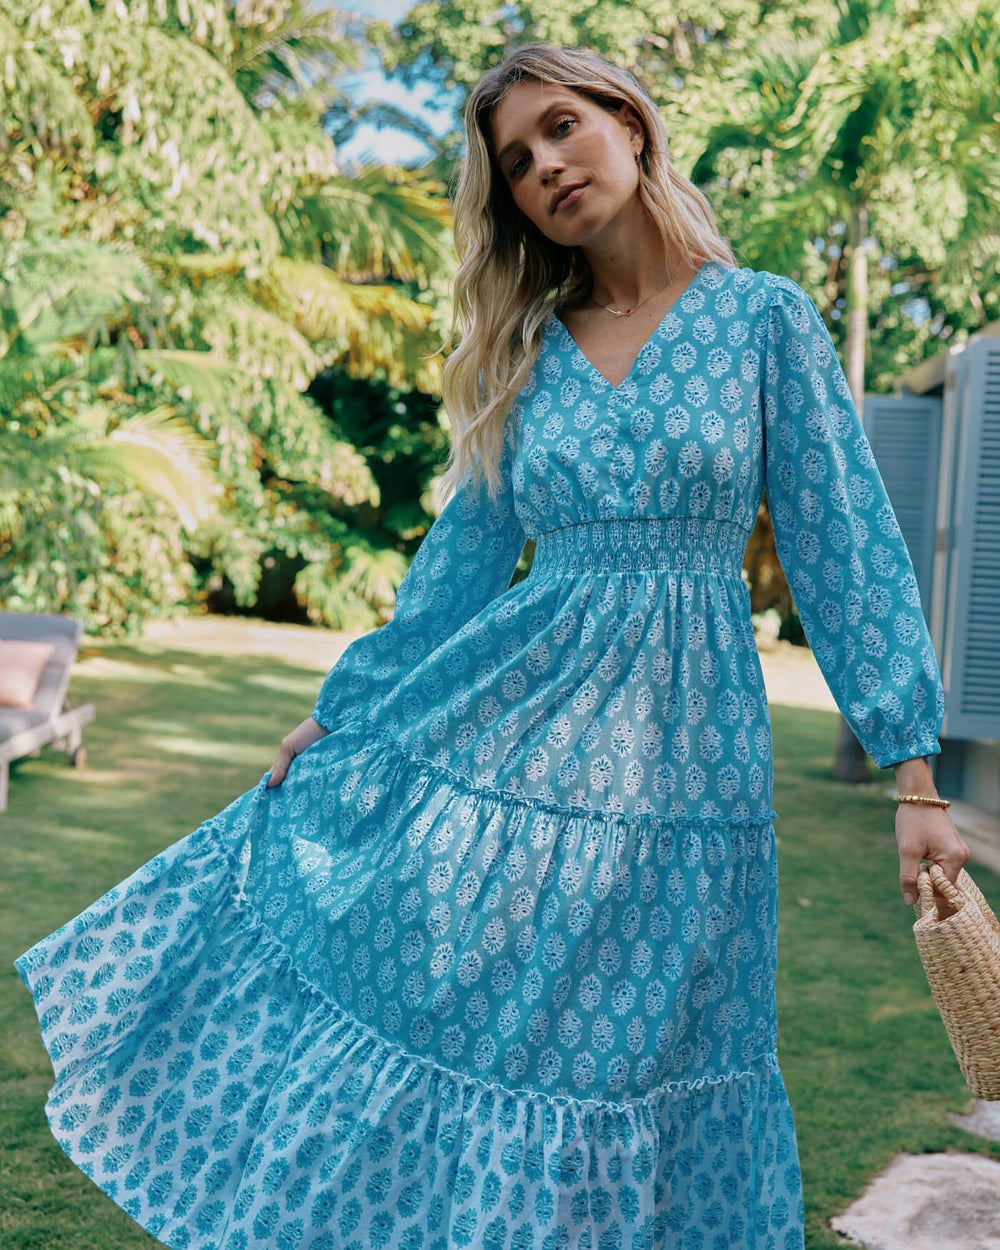 The front view of the Southern Tide Blaire Garden Variety Printed Maxi Dress by Southern Tide - Clearwater Blue